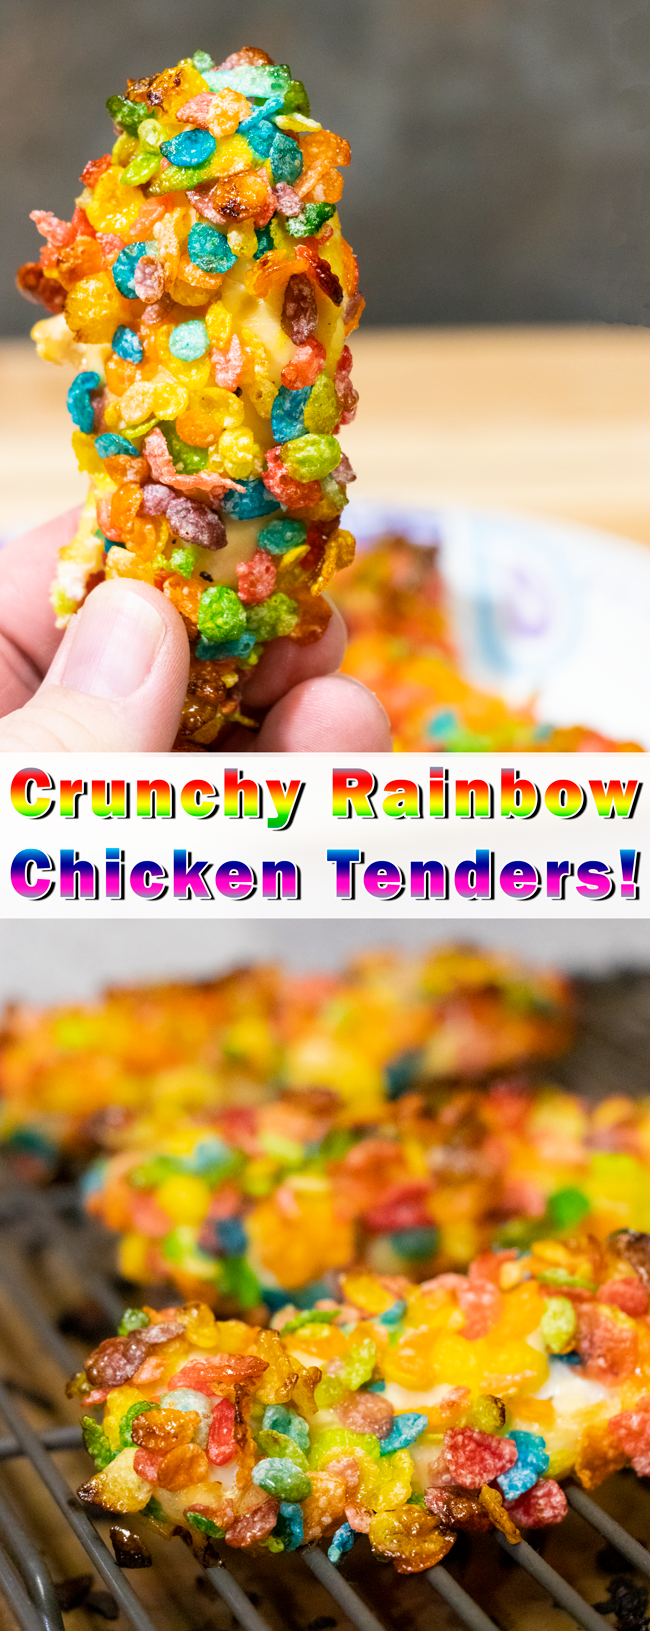 crunchy rainbow baked chicken tenders are a fun and easy to make family recipe